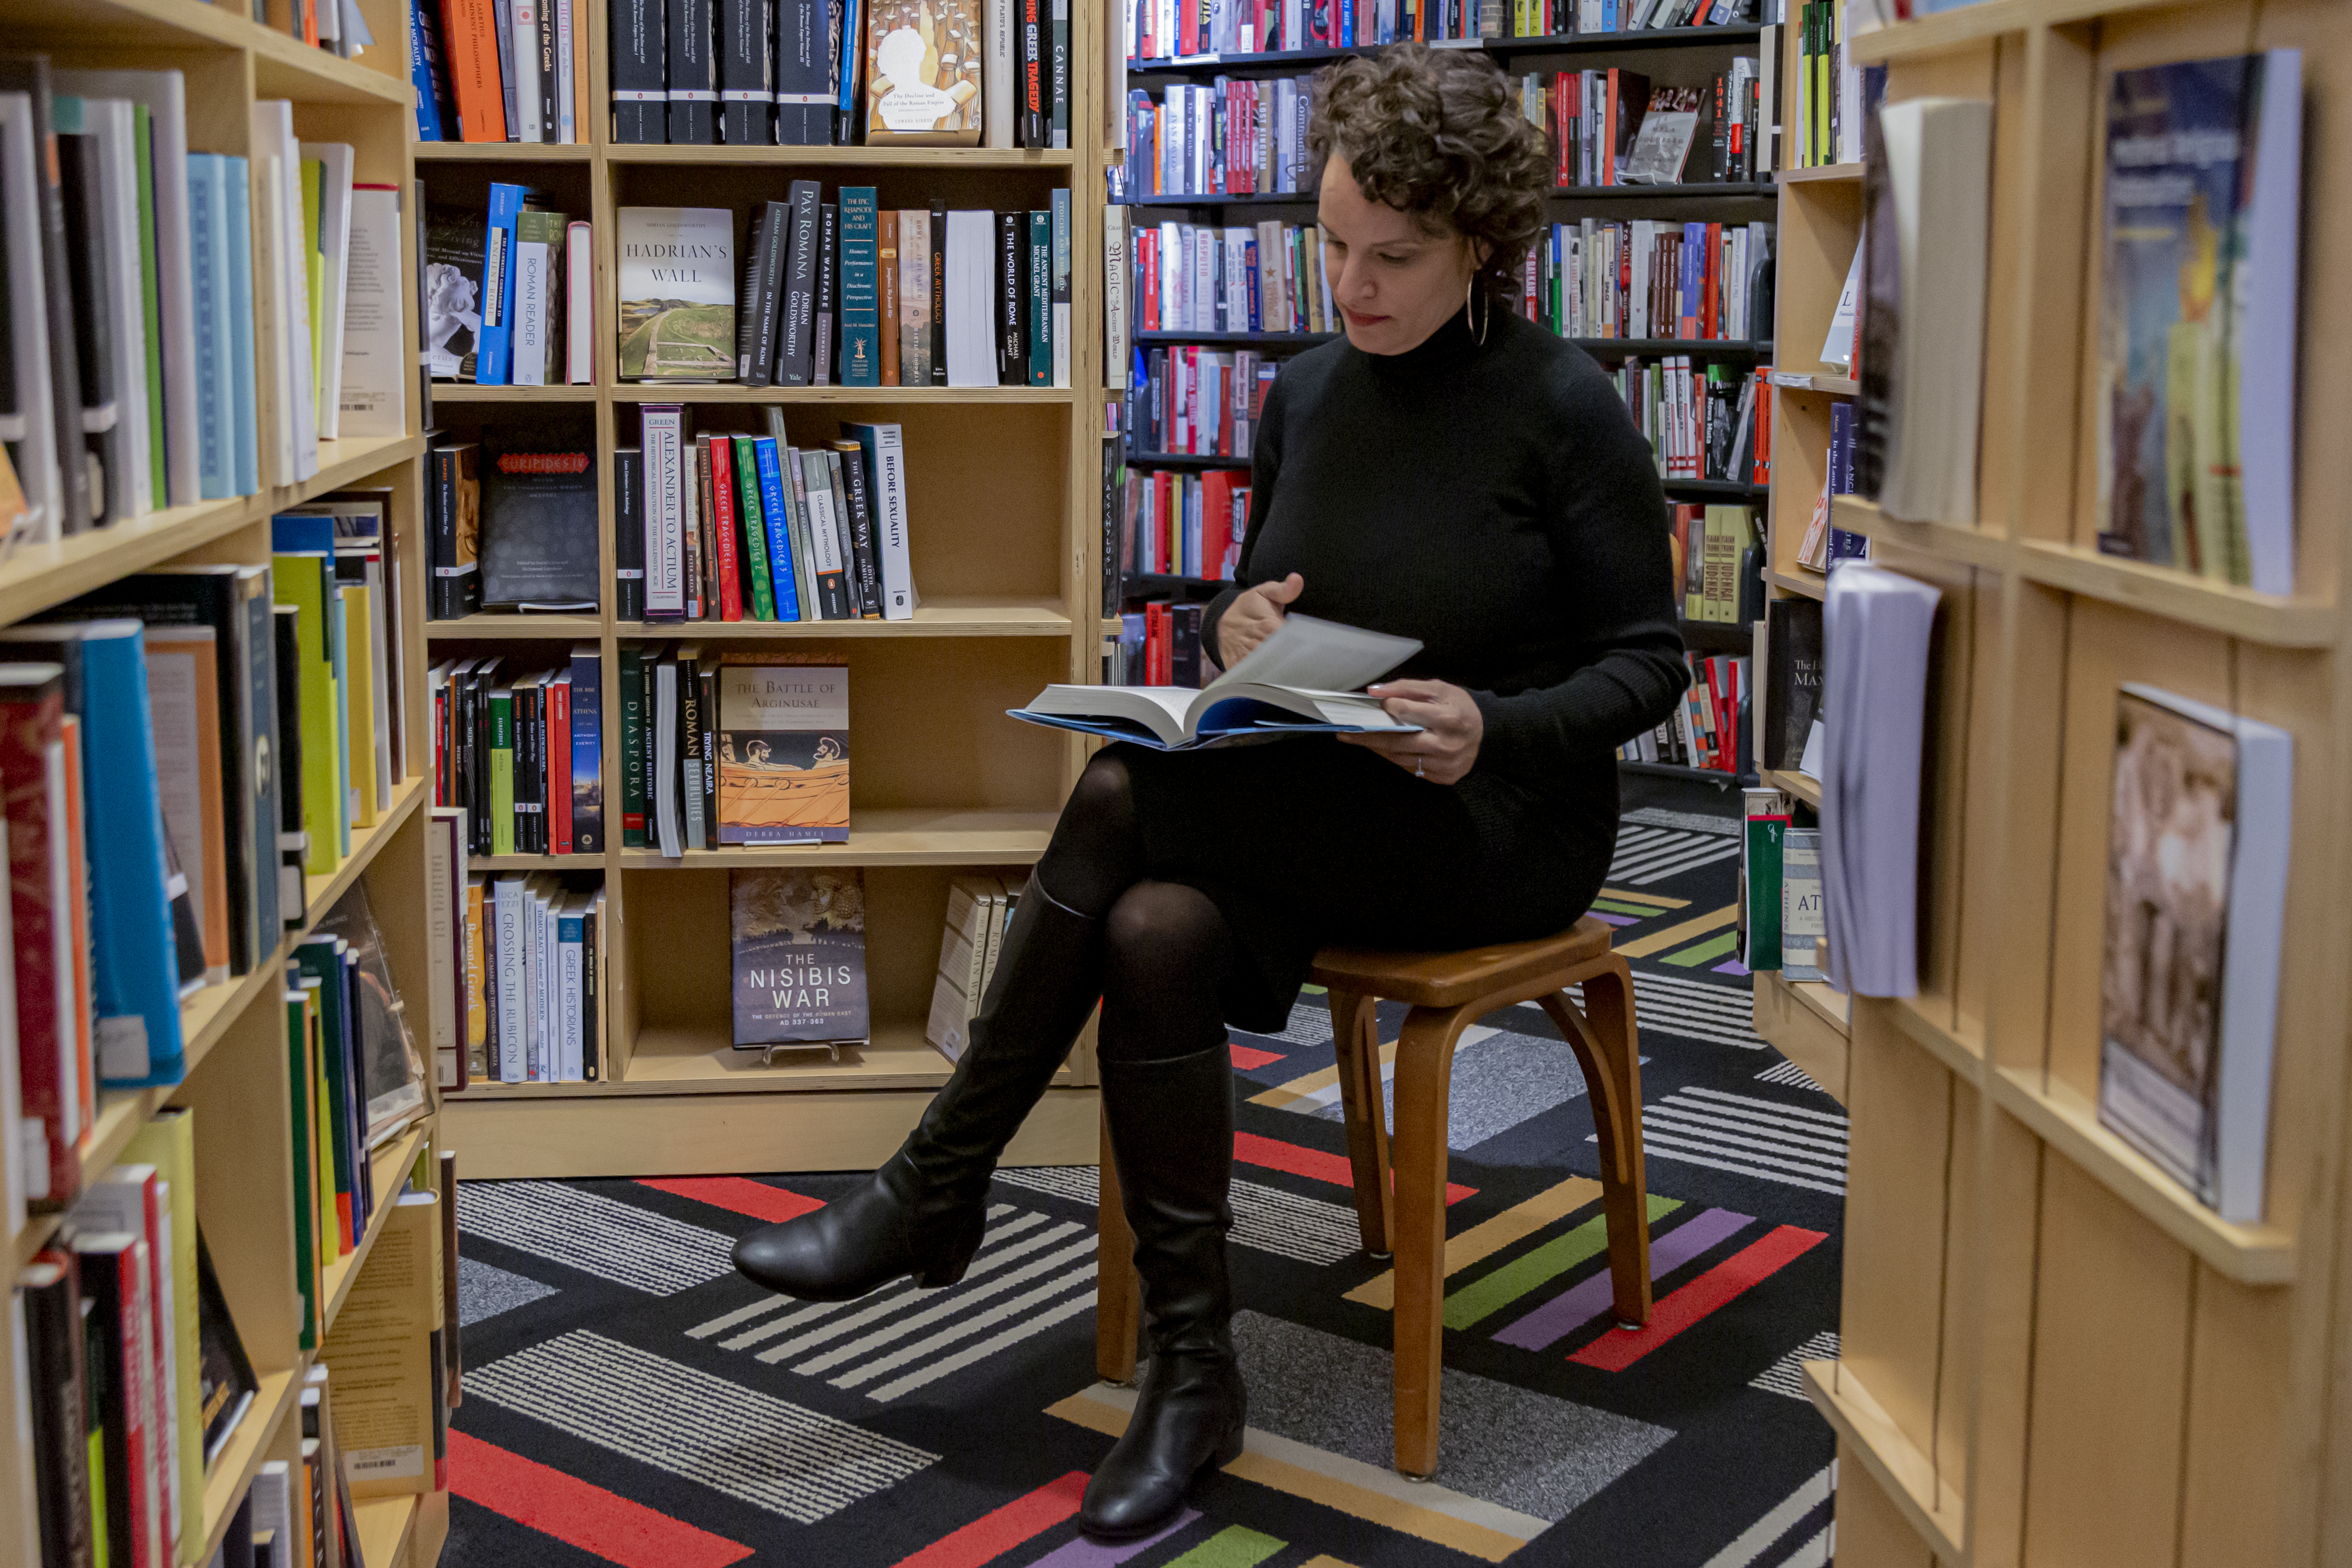 Image: Mustafah sits in a wooden chair inside a bookstore, browsing through an open book in her lap. She wears a long-sleeved black turtleneck dress, black tights, black boots, and large hoop earrings. Bookshelves full of books are behind and around her, positioned at various angles. The carpet’s pattern is a grid of thin and thick stripes in black and white and bright colors. Photo by Mark Blanchard.